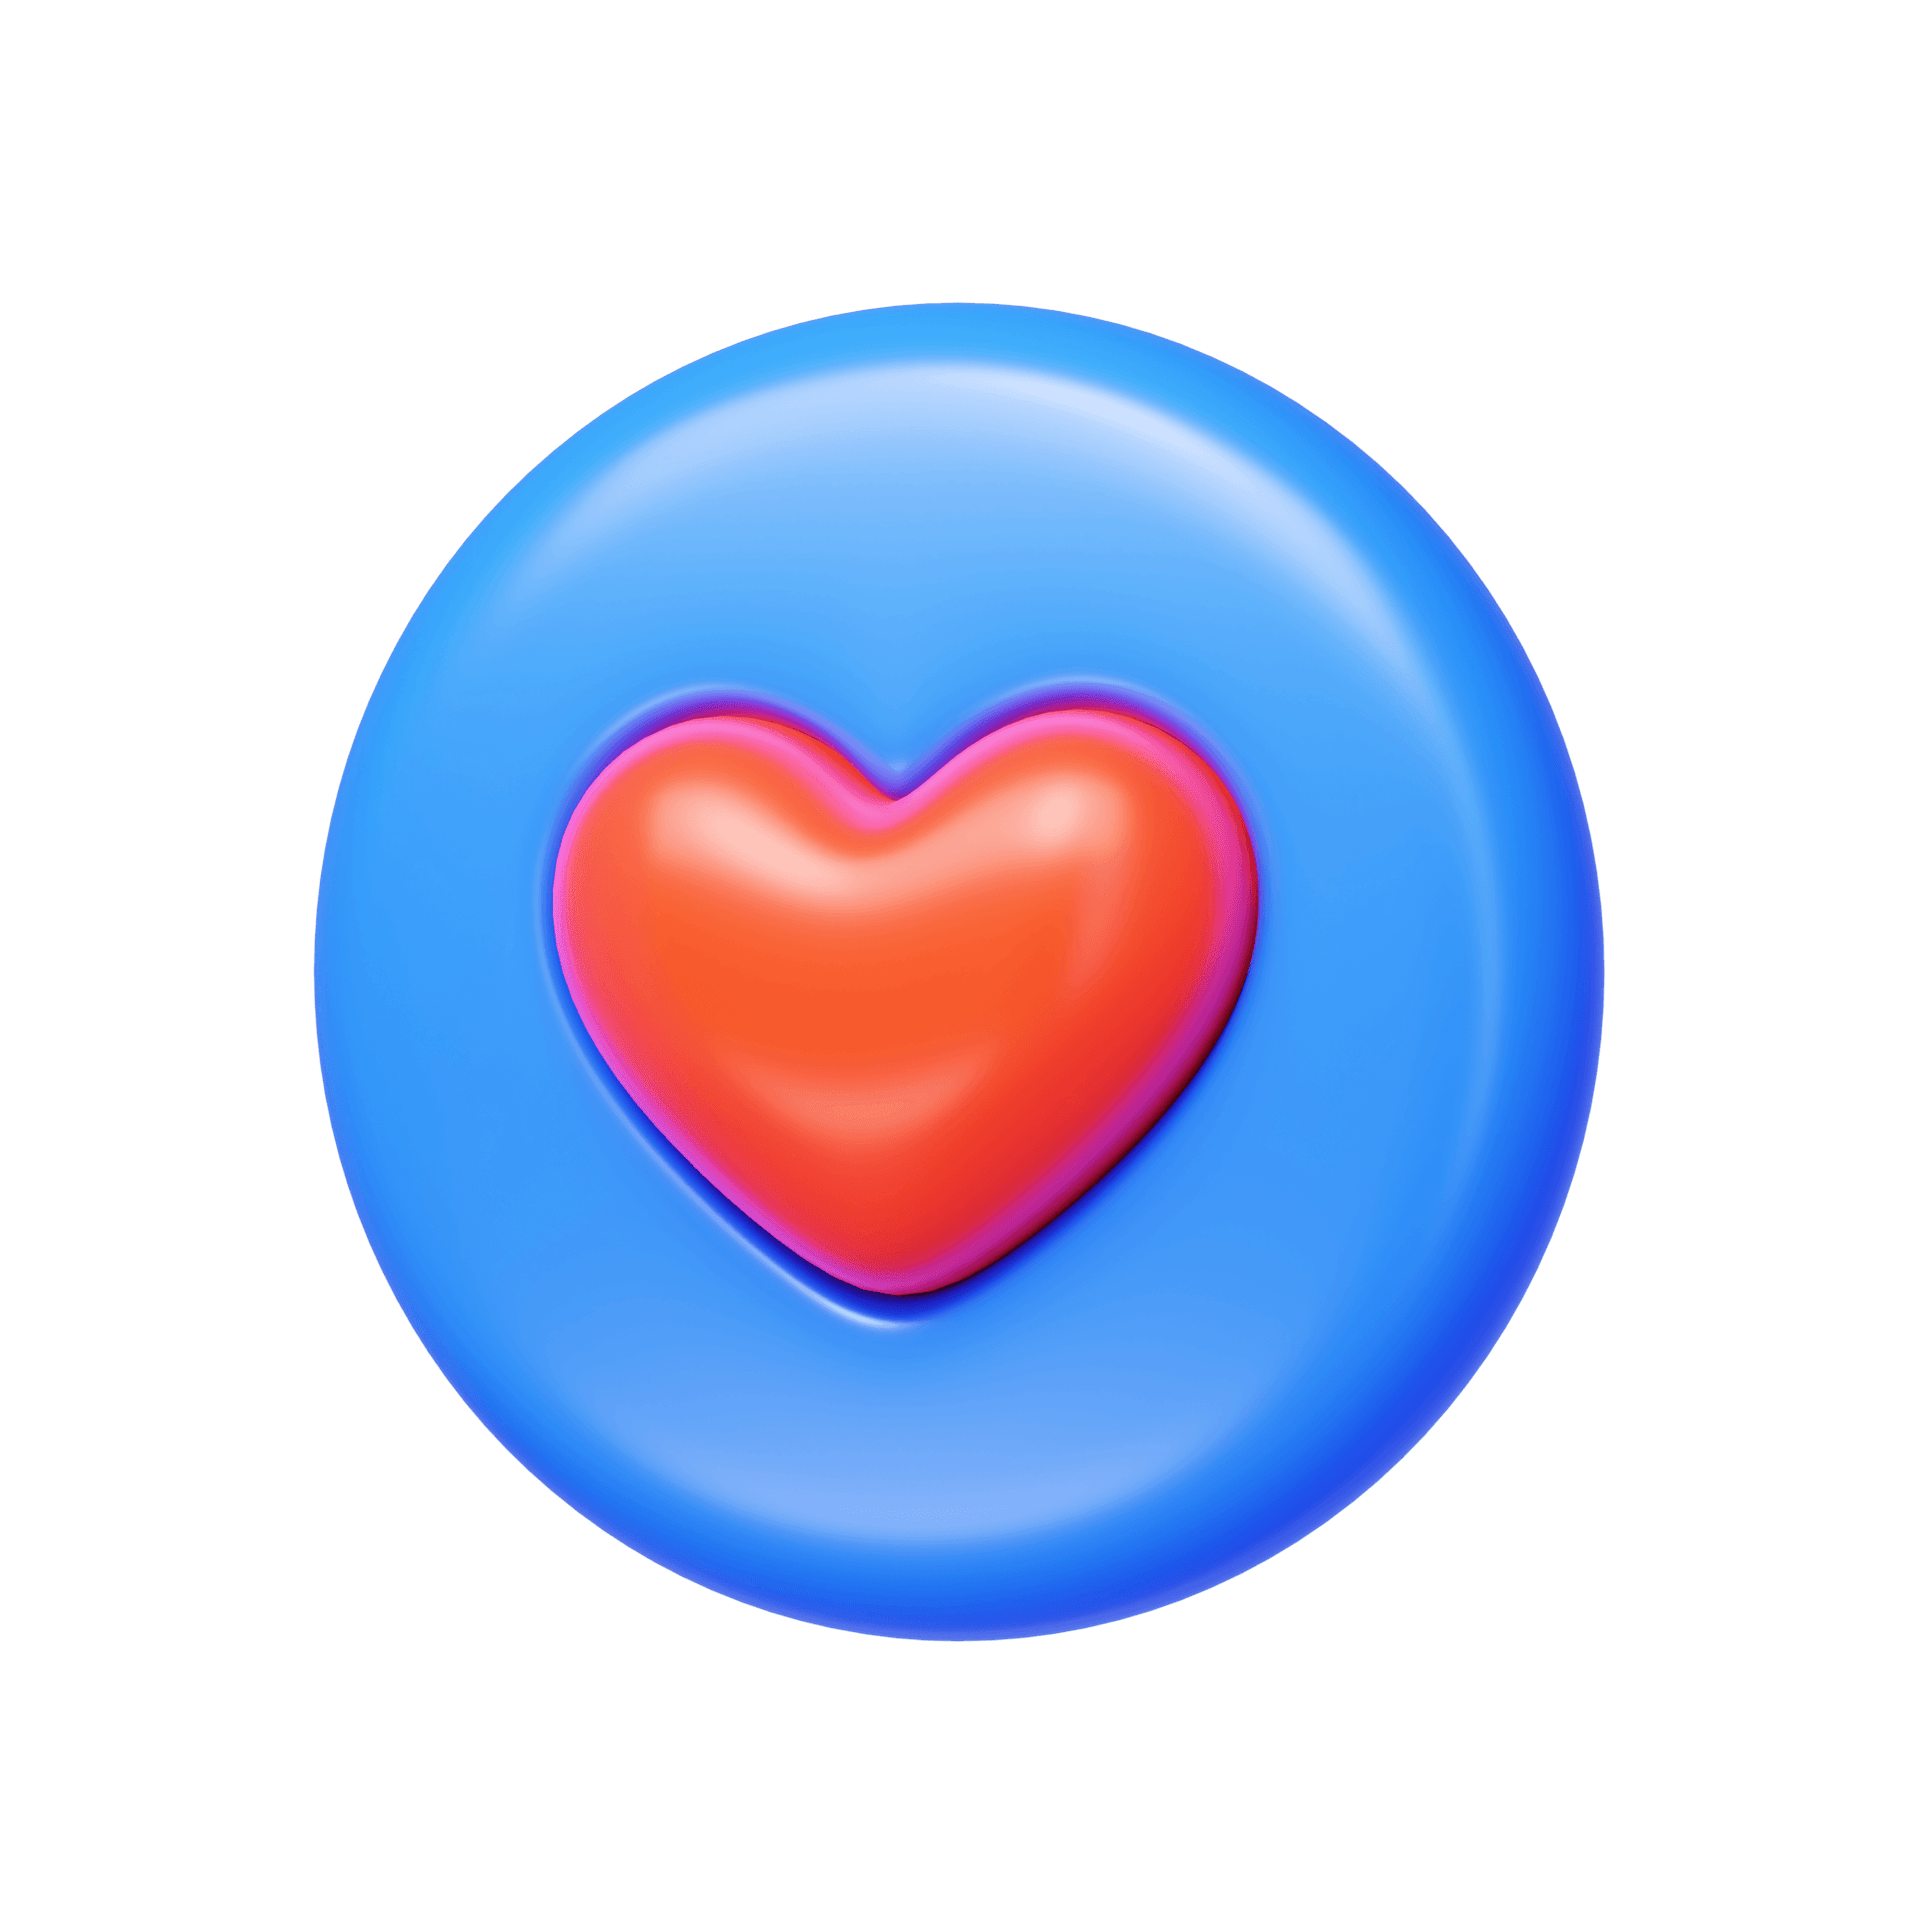 A blue circle with a red heart inside of it.